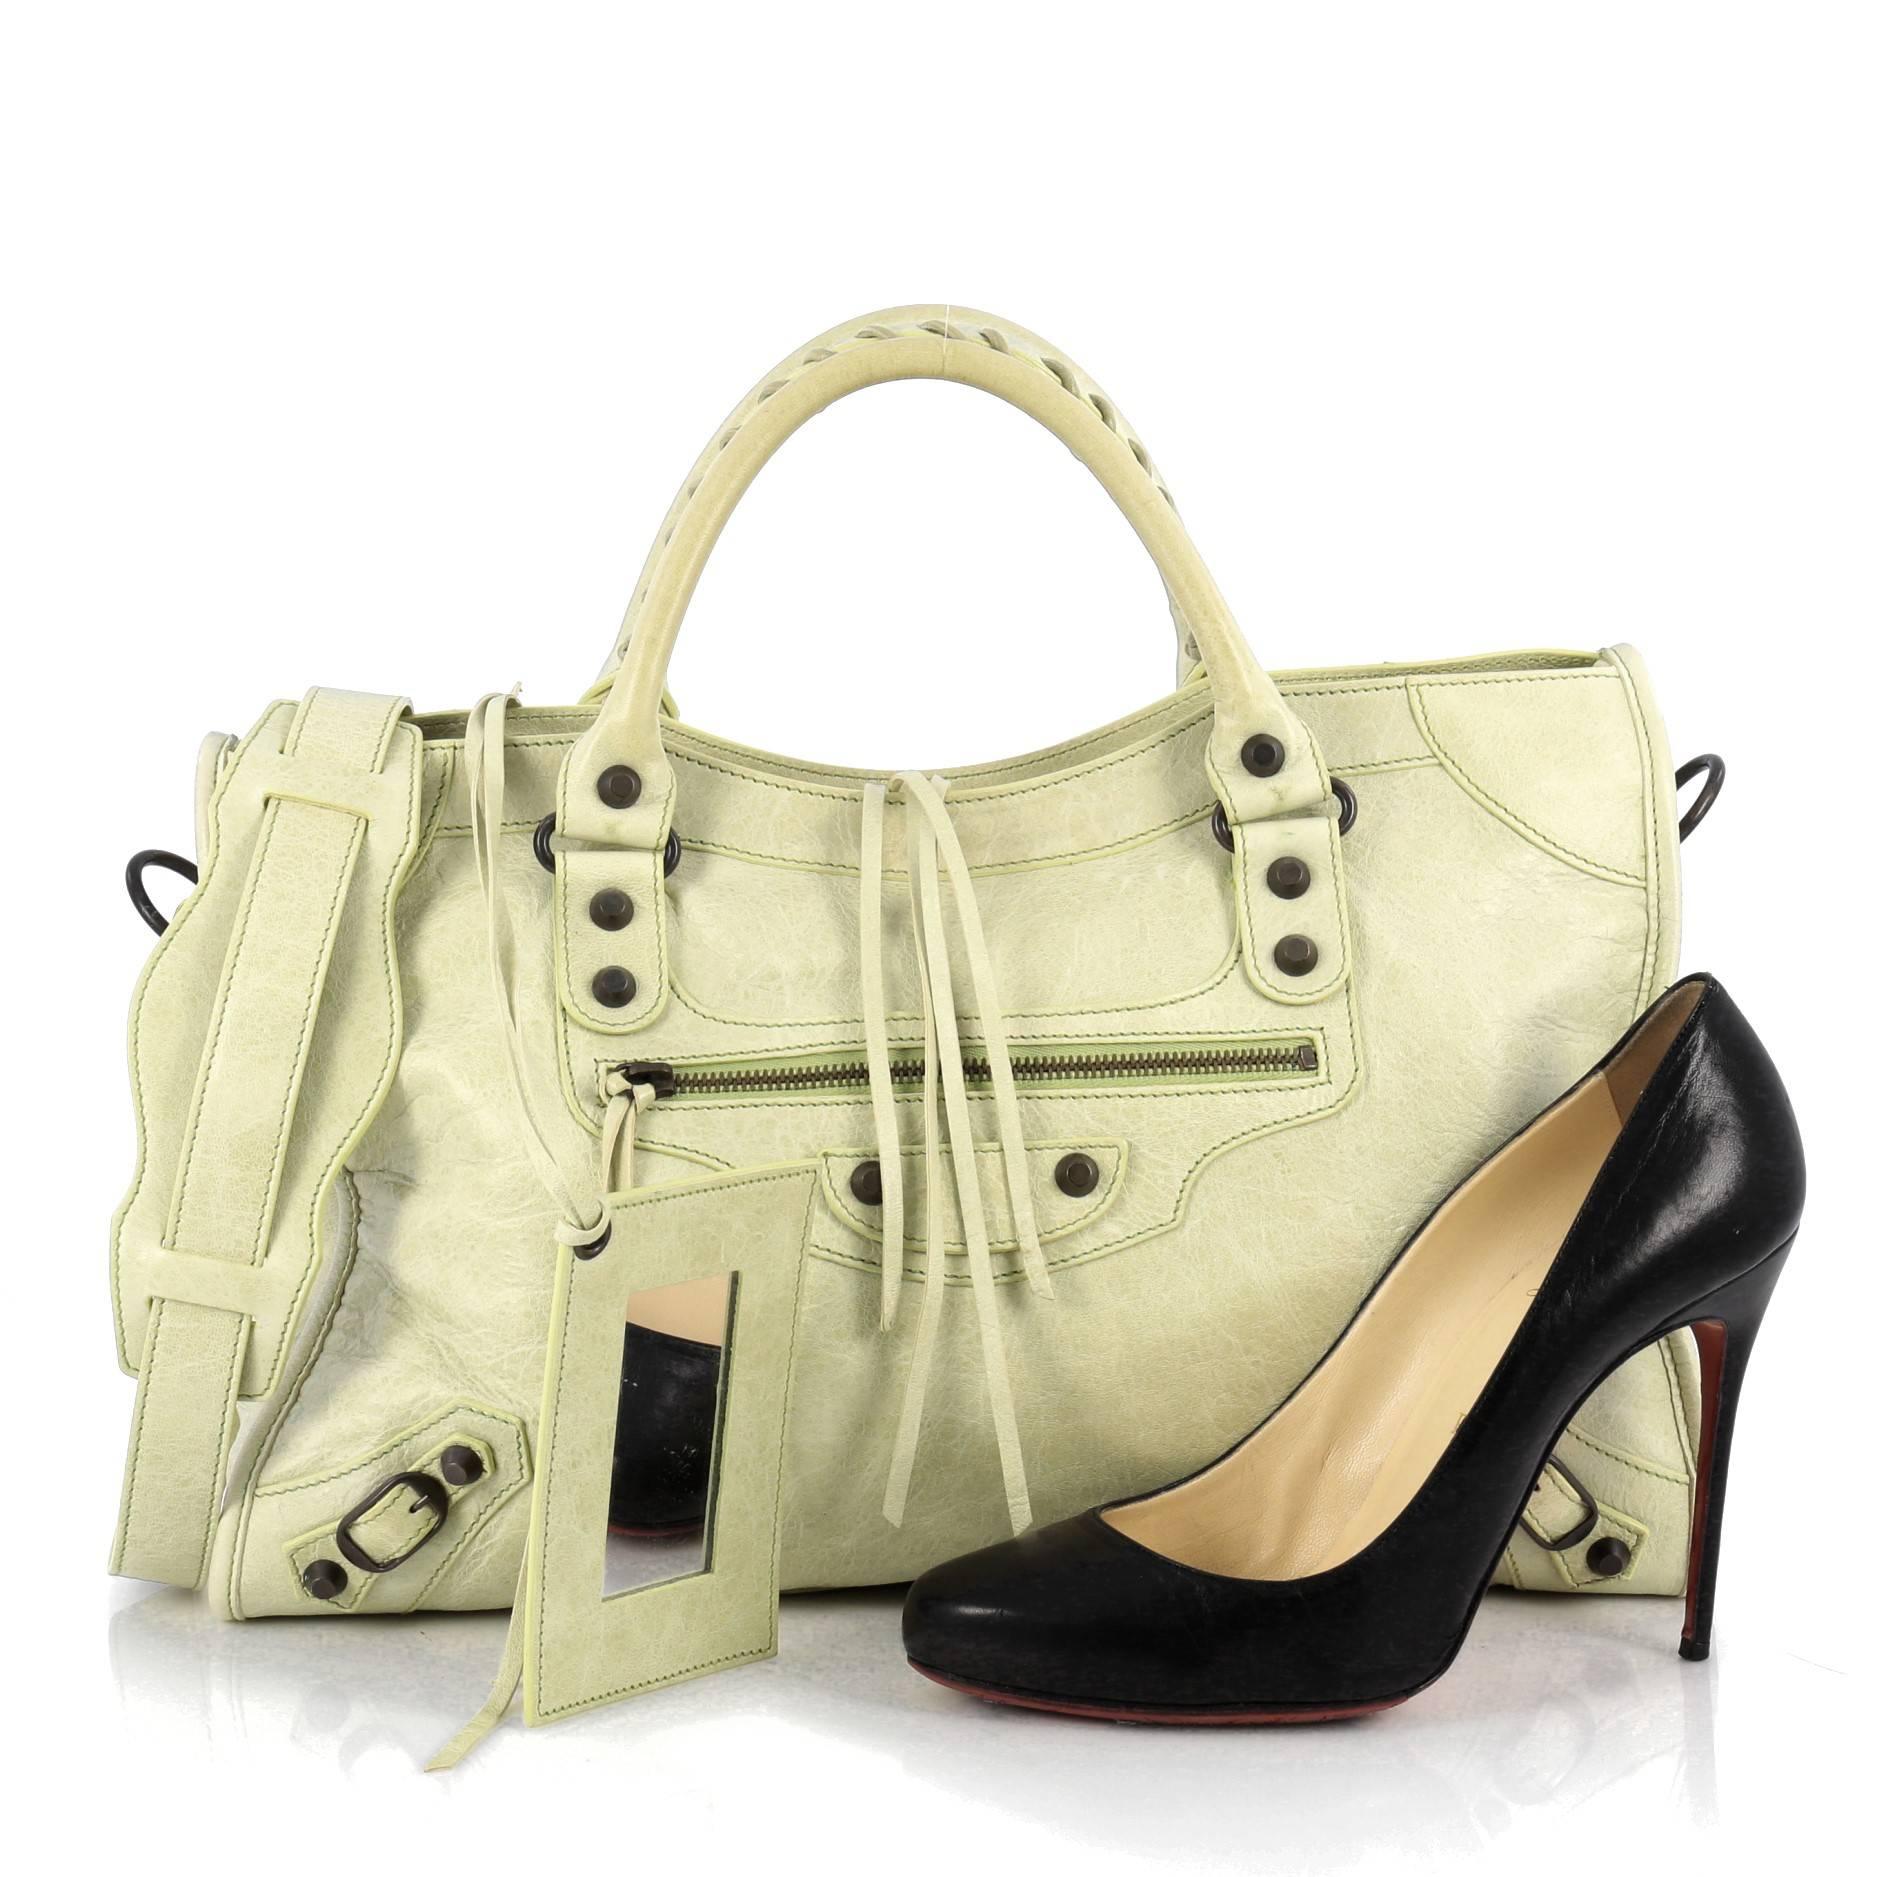 This authentic Balenciaga City Classic Studs Handbag Leather Medium is for the on-the-go fashionista. Constructed in lime green leather, this popular bag features dual braided woven handle straps, front zip pocket, iconic Balenciaga classic studs